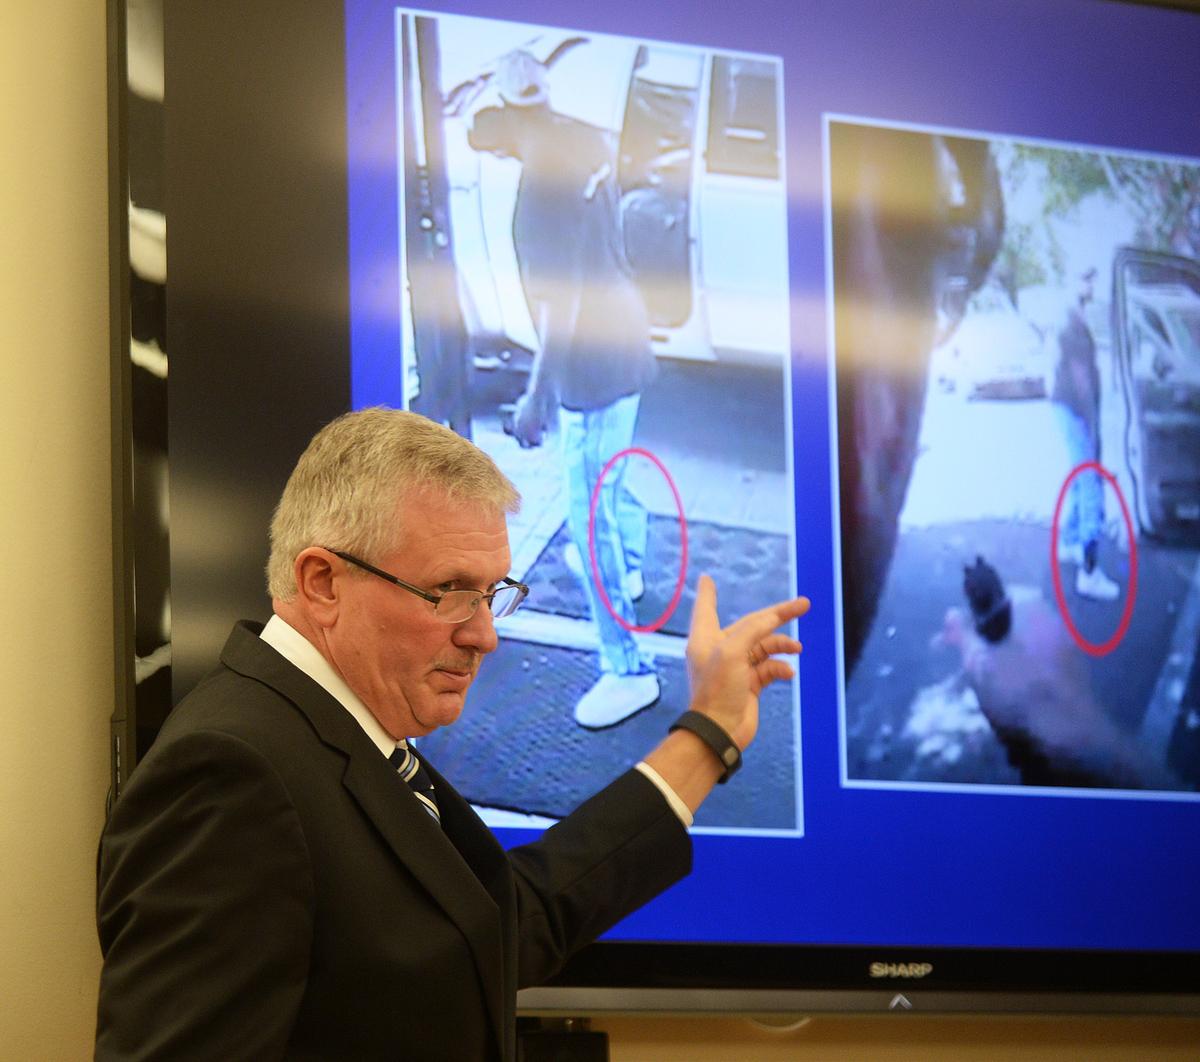 District Attorney Andrew Murray discusses evidence as he speaks at the District Attorney's office during a press conference in Charlotte, N.C., on Nov. 30, 2016. (Diedra Laird/The Charlotte Observer via AP)